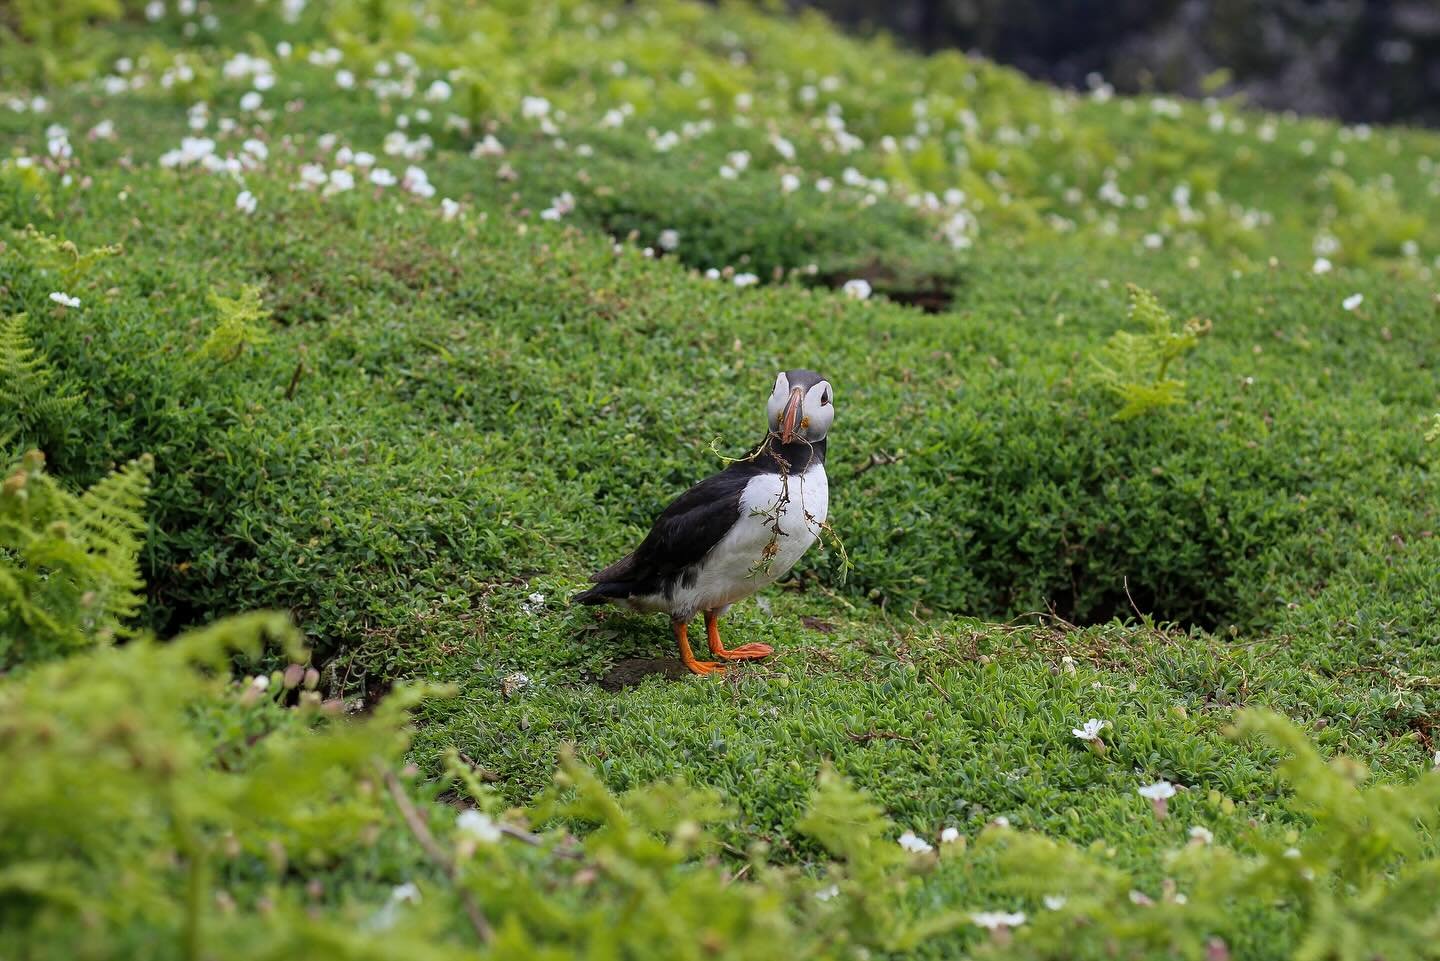 Officially the cutest birds in existence, I could&rsquo;ve easily watched them all day! Thank you @_pembrokeshireislands for the most incredible experience. #skomerisland #skomerpuffin #pembrokeshirecoast #visitpembrokeshire